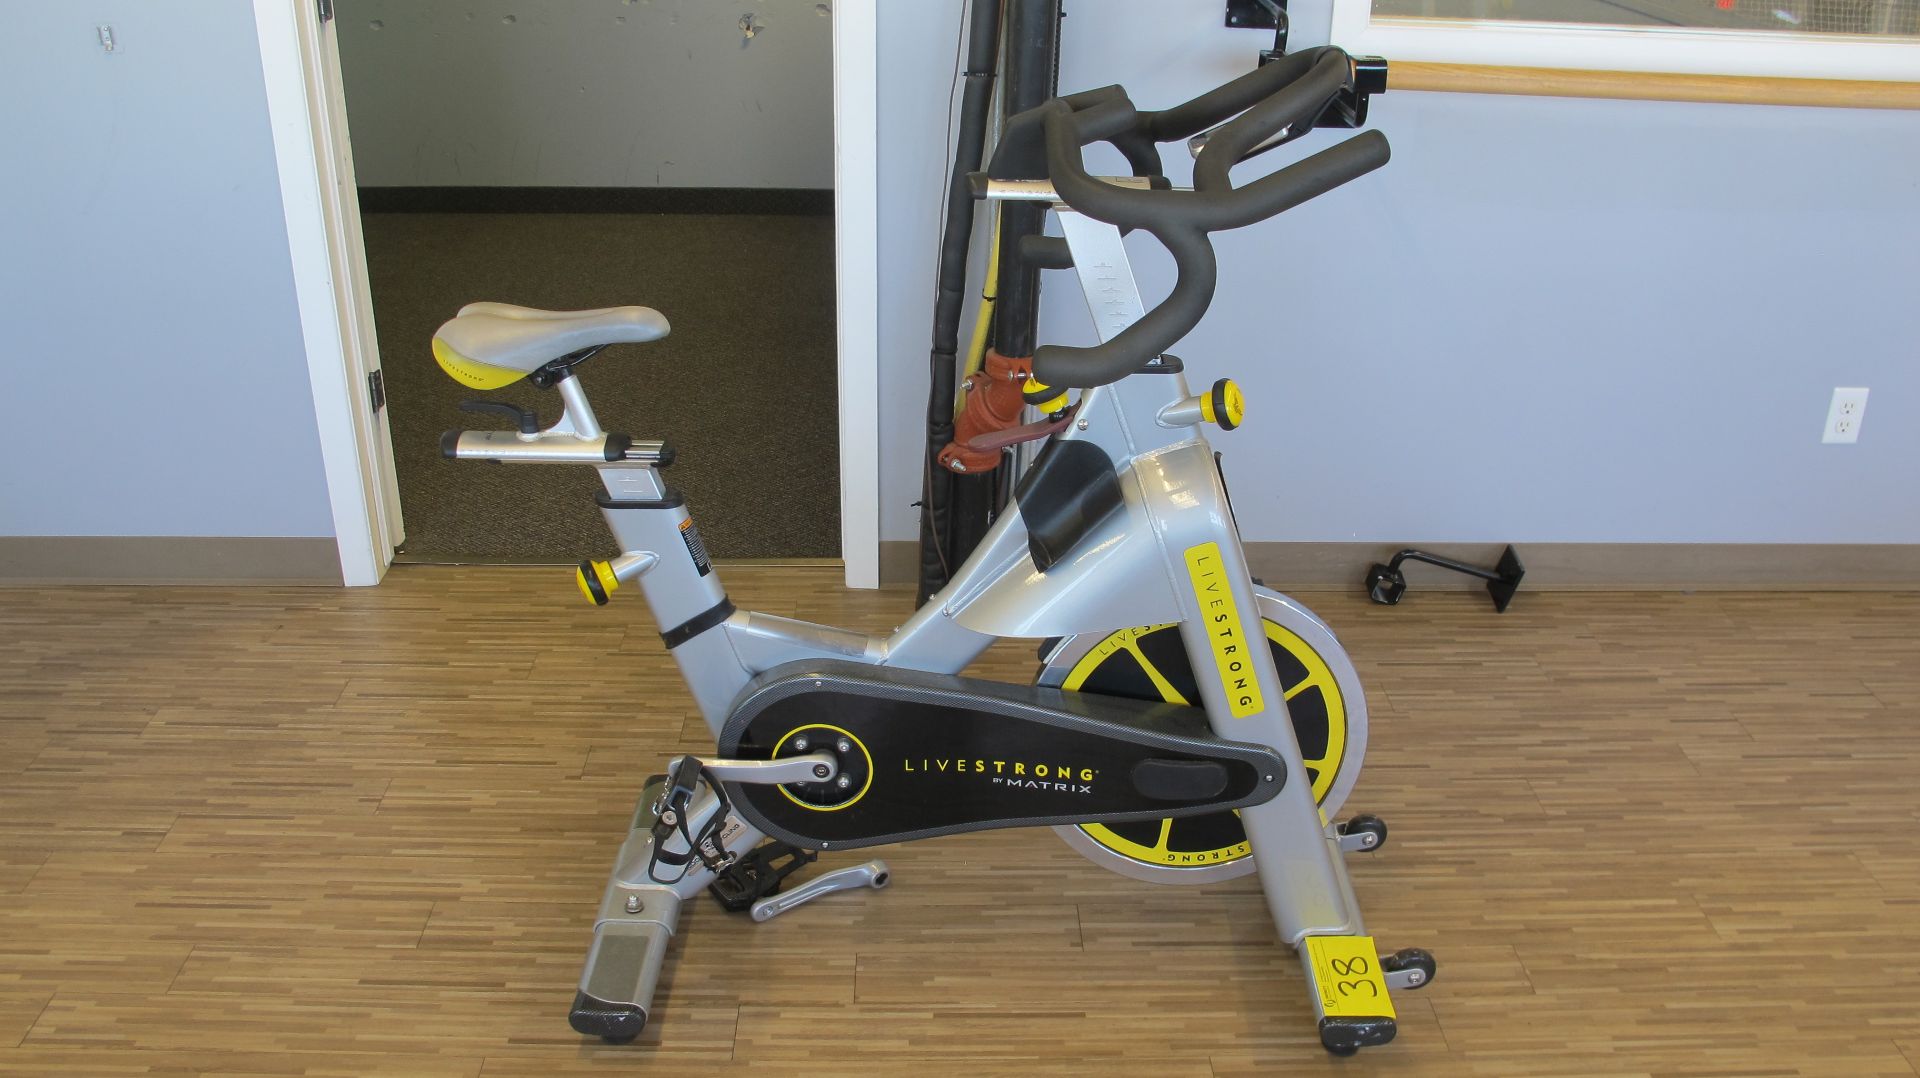 LIVESTRONG LS S-Series Class S Stationary Spin Bike, 'AS-IS', S/N: LASB0008034-111 - Image 5 of 10